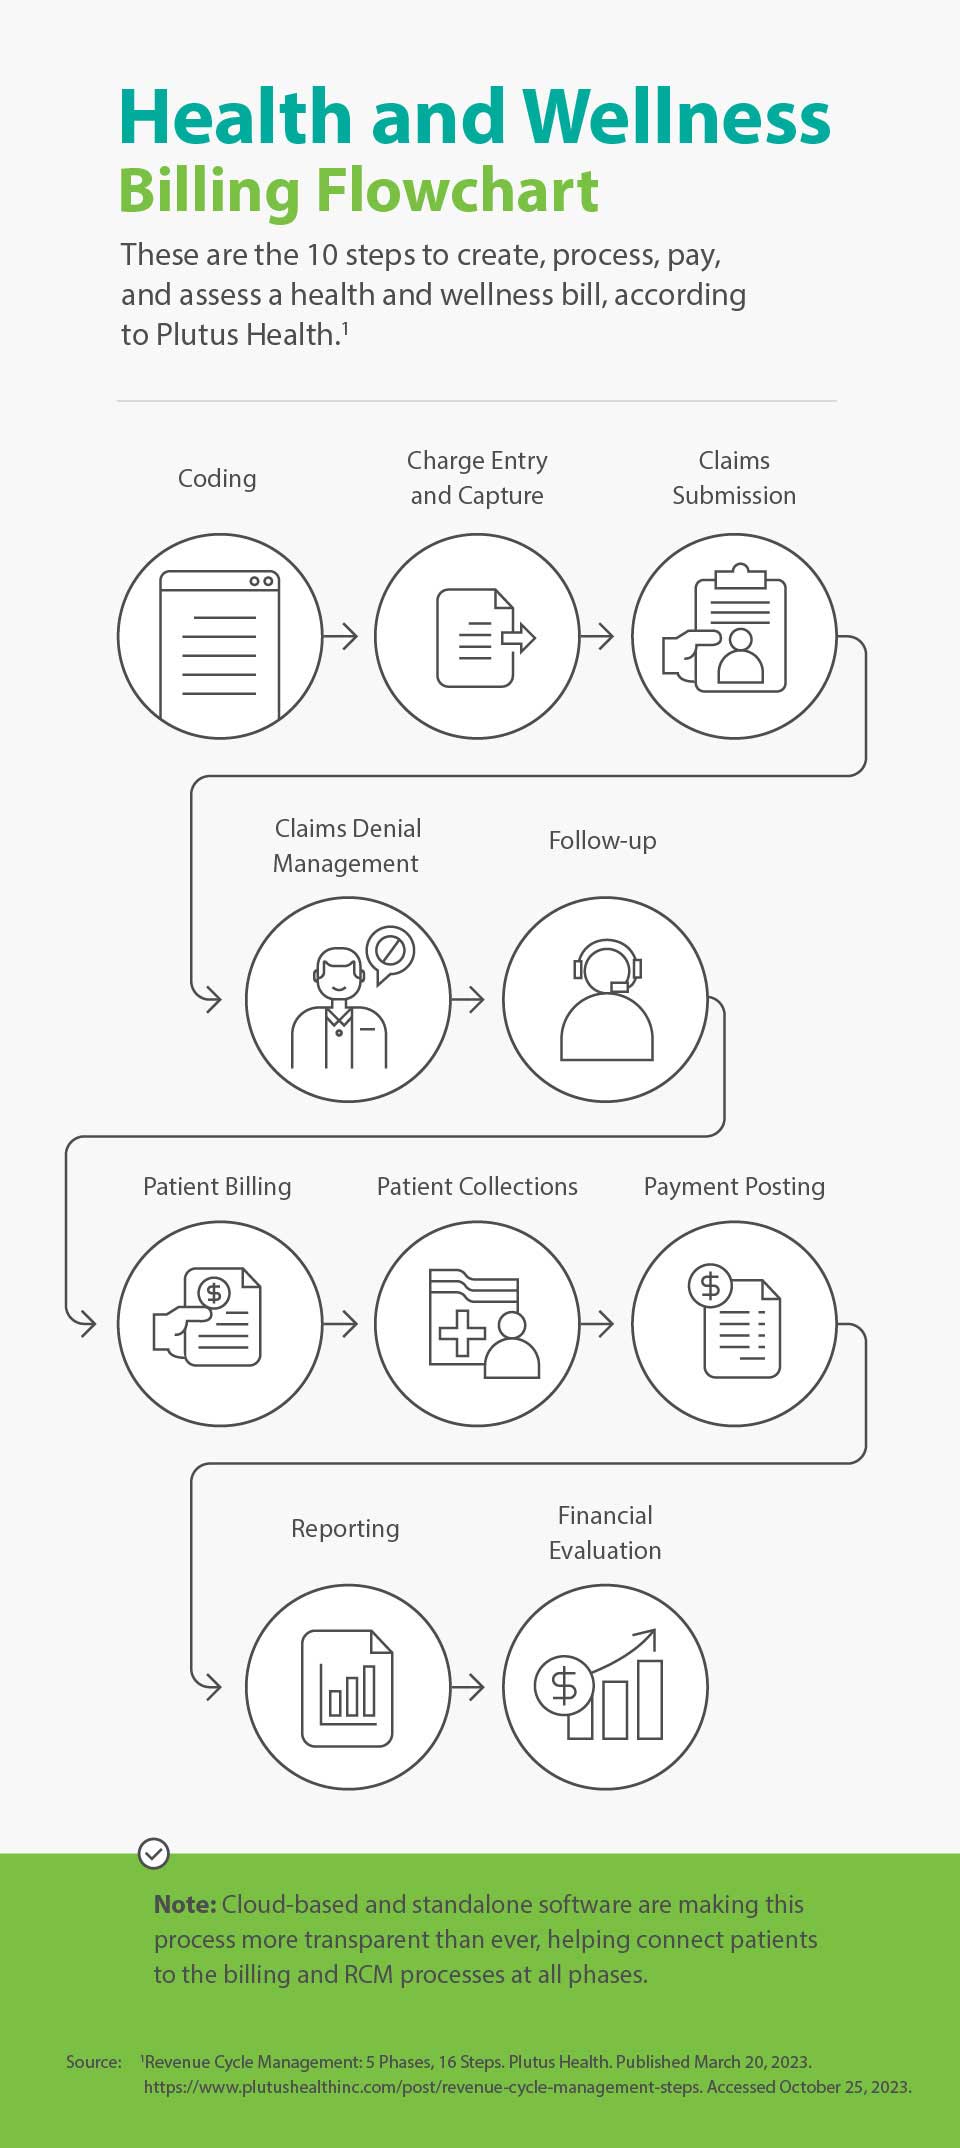 Information about the Medical Billing Process